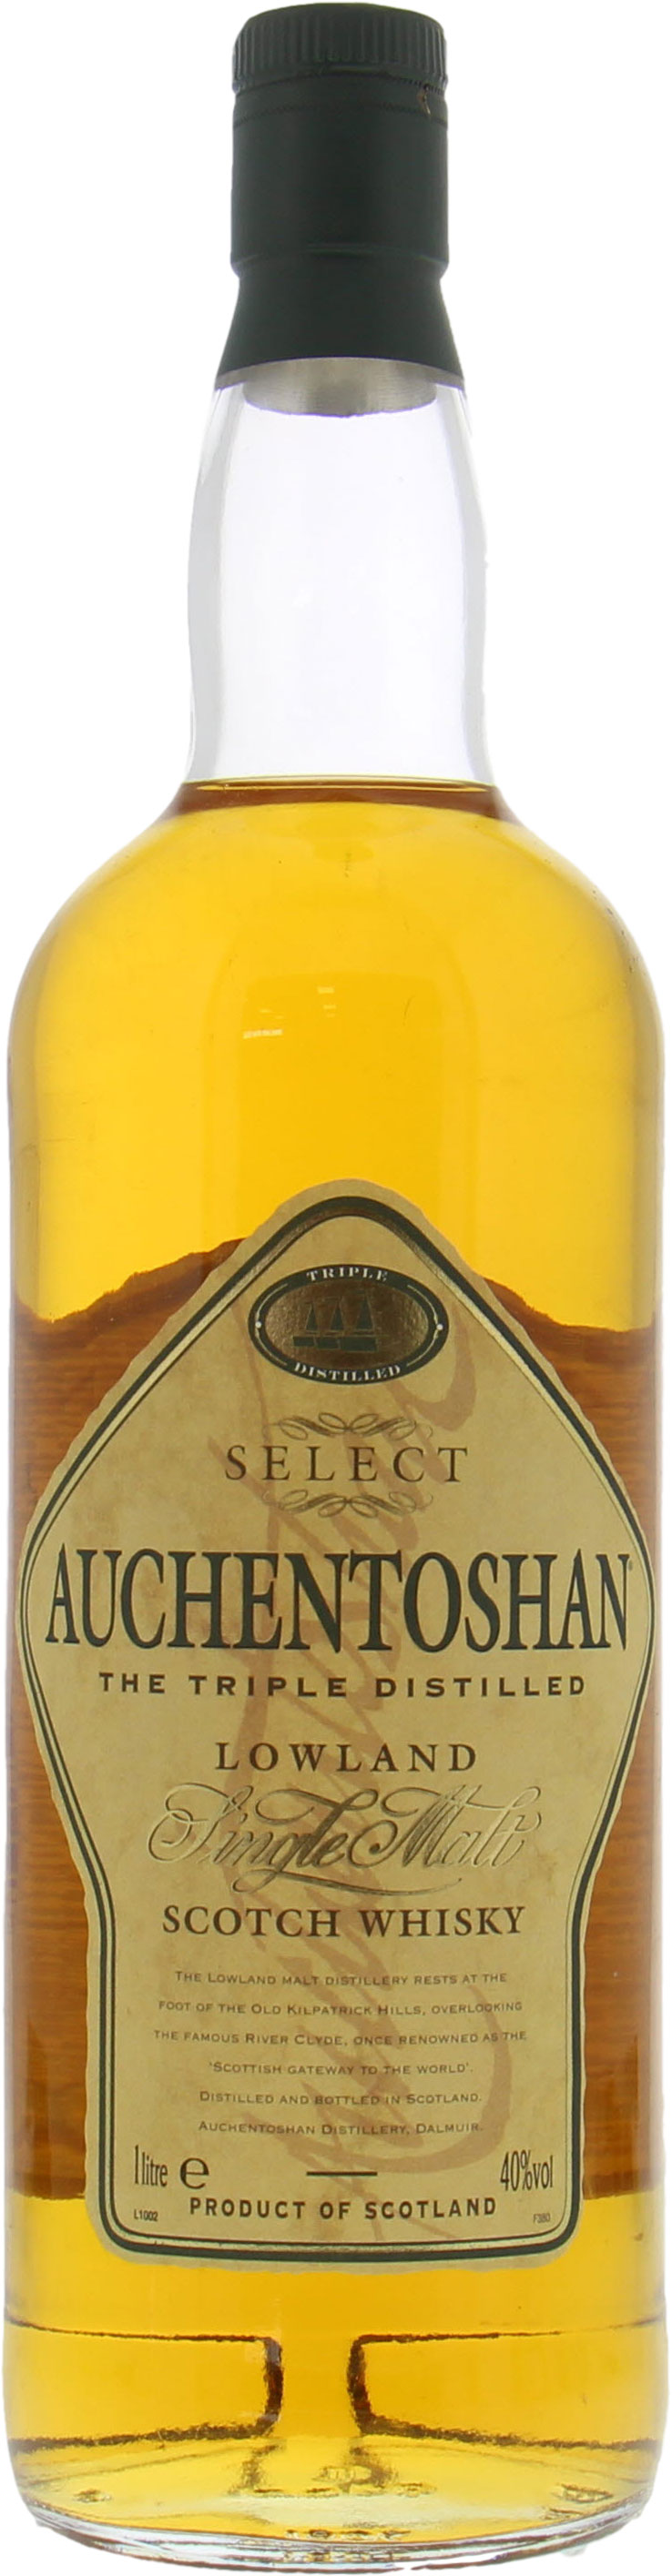 Auchentoshan - Select Old Label 40% NV No Original Container Included!